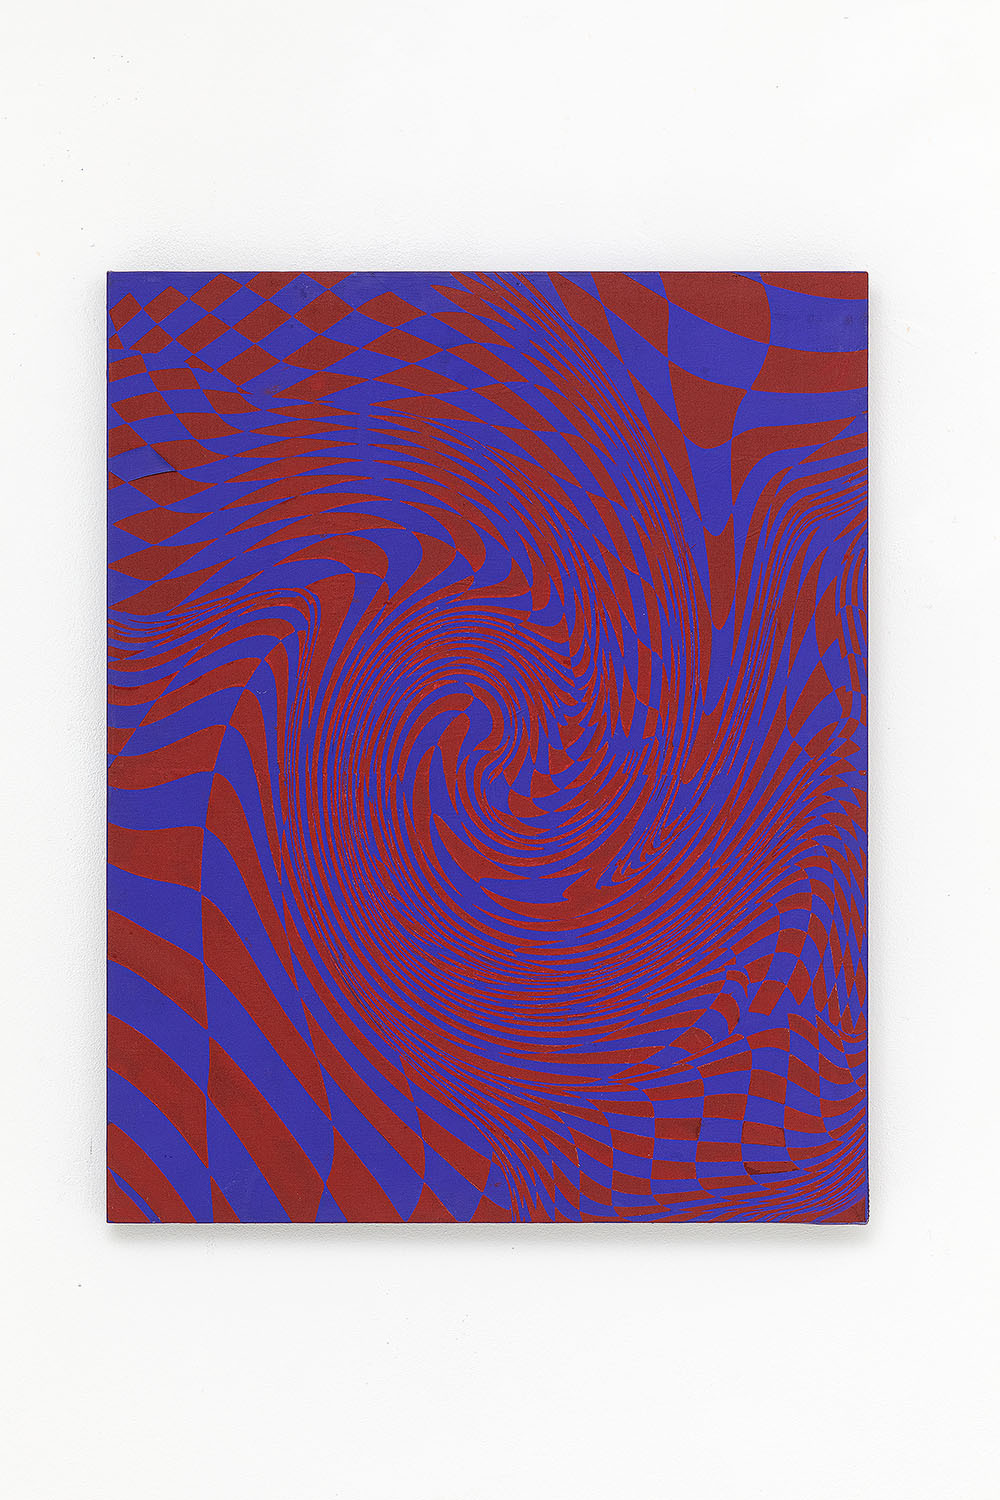 Charlotte Houette, Untitled (Purple psyche), 2022, acrylic on canvas, 60,5 x 75 cm